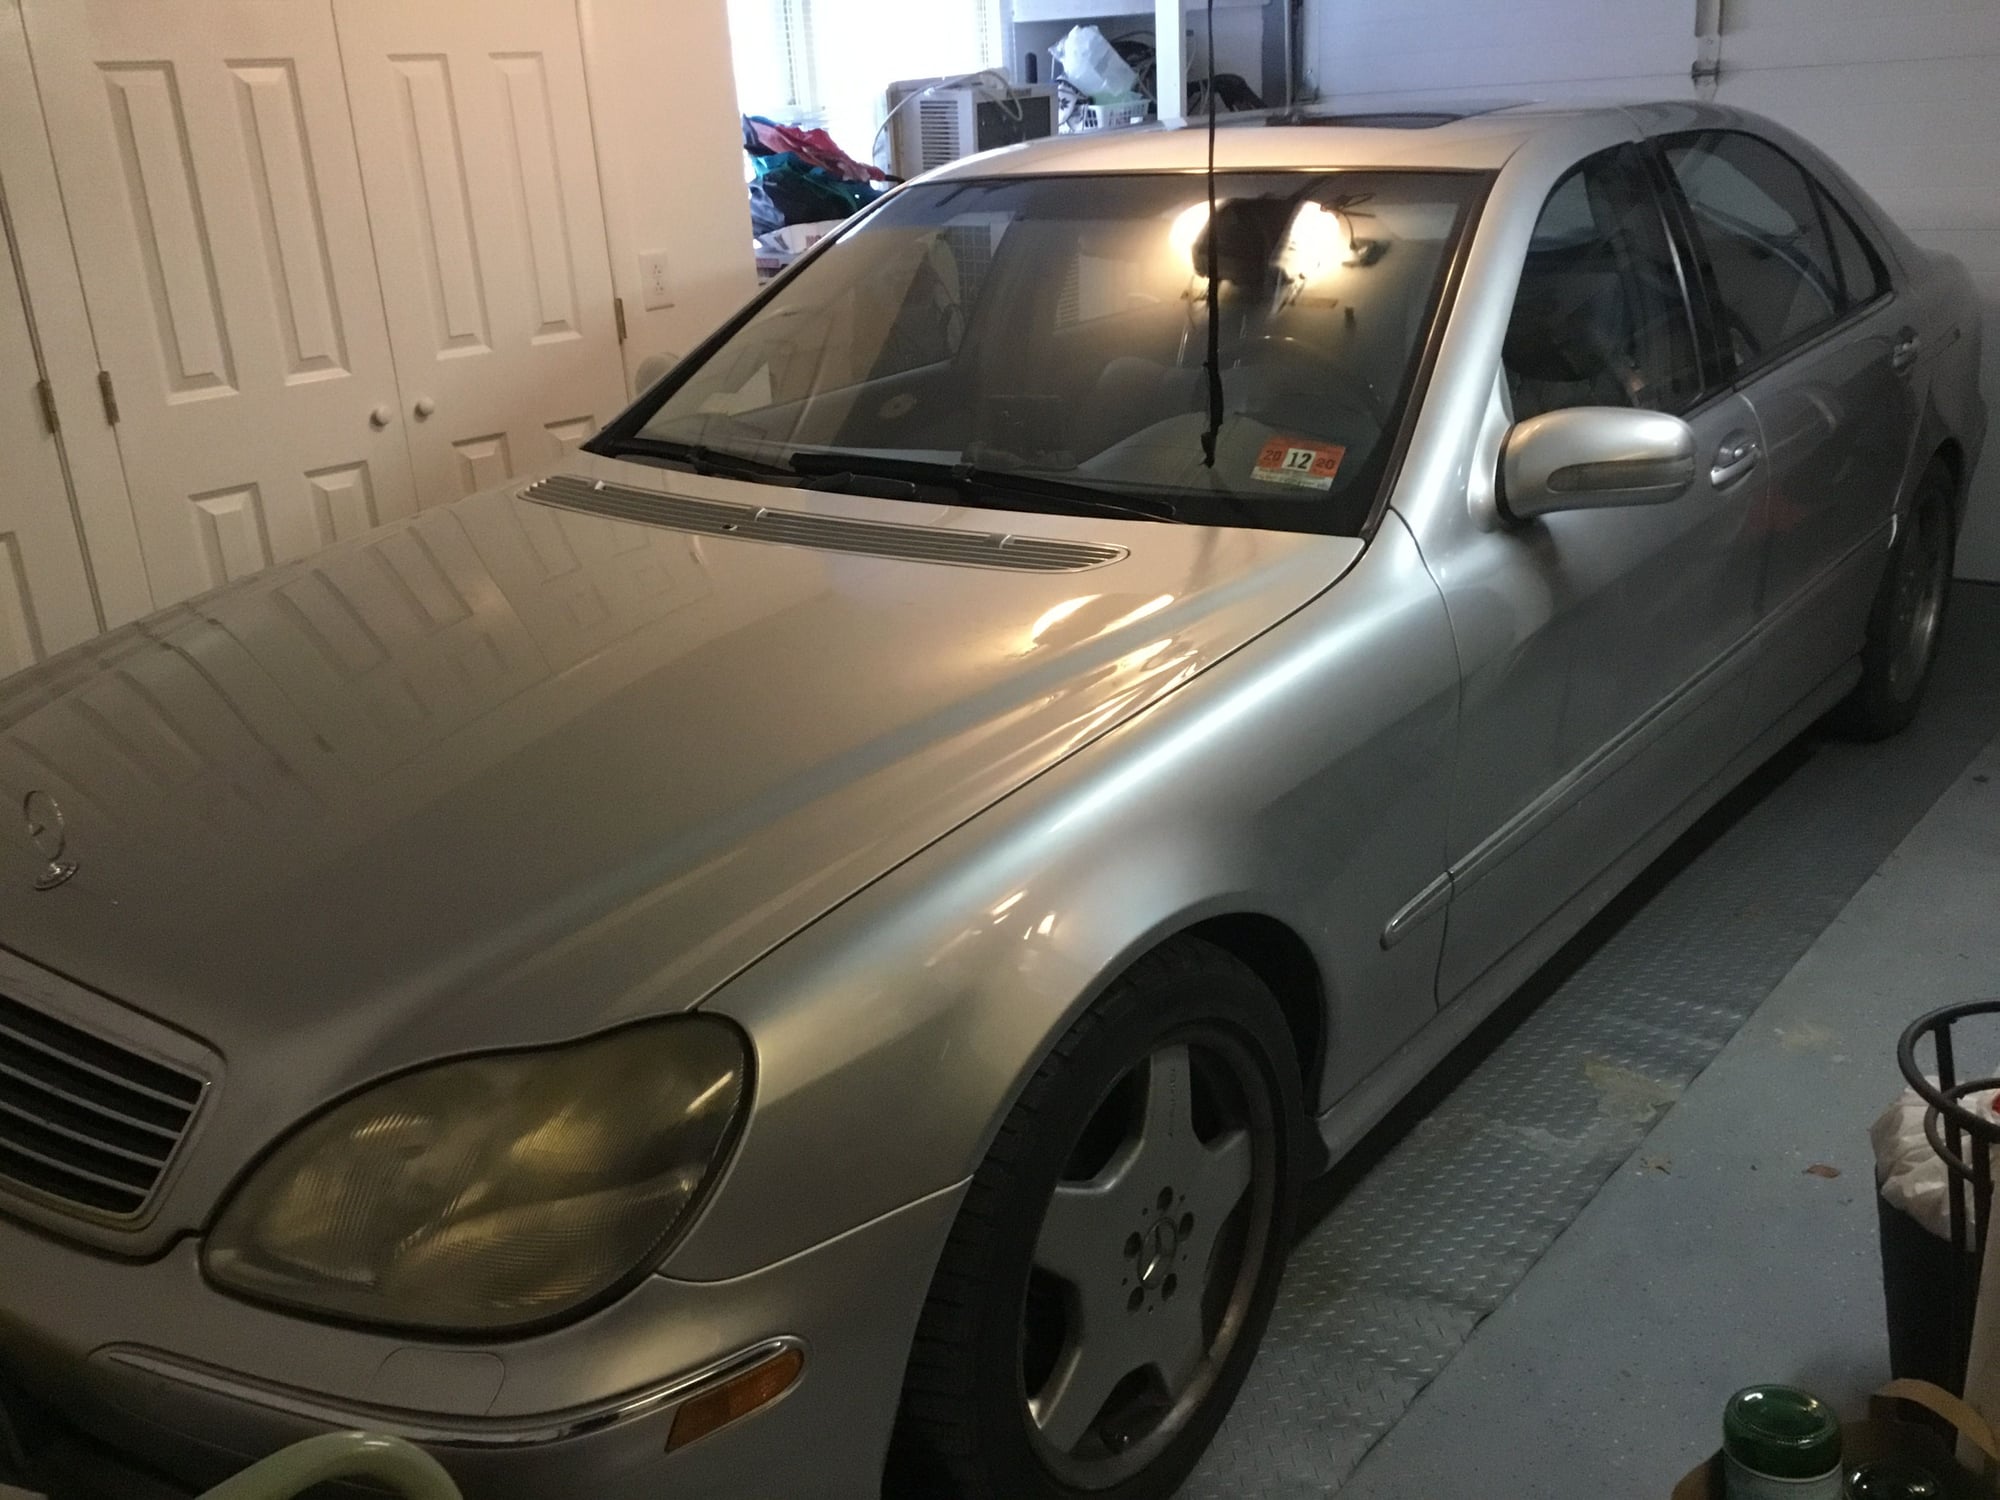 2002 Mercedes-Benz S500 - 2002 Mercedes Benz S500 Sport - 2-owner, clean, well maintained - $5500 - Used - VIN WDBNG75J62A313366 - 160,240 Miles - 2WD - Automatic - Sedan - Gray - Clifton, NJ 07013, United States